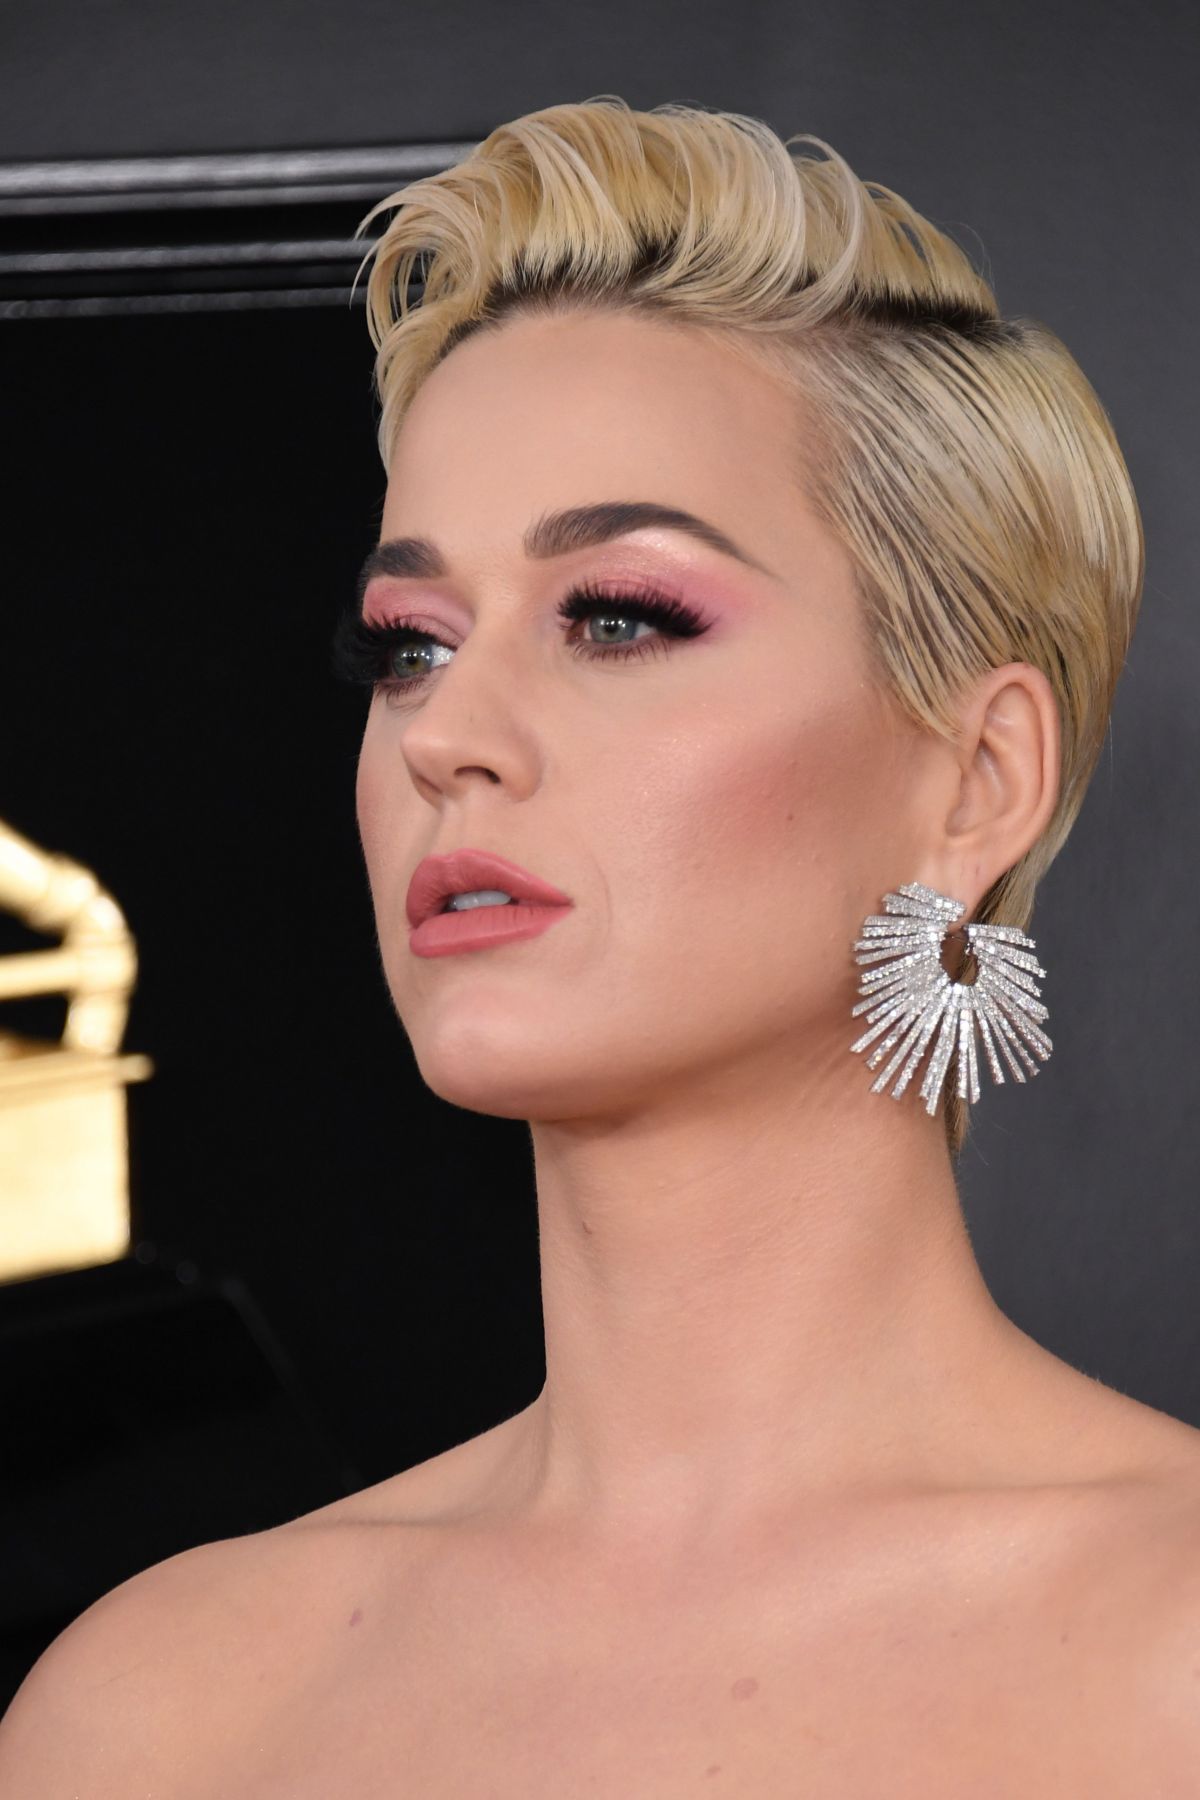 KATY PERRY at 61st Annual Grammy Awards in Los Angeles 02/10/2019